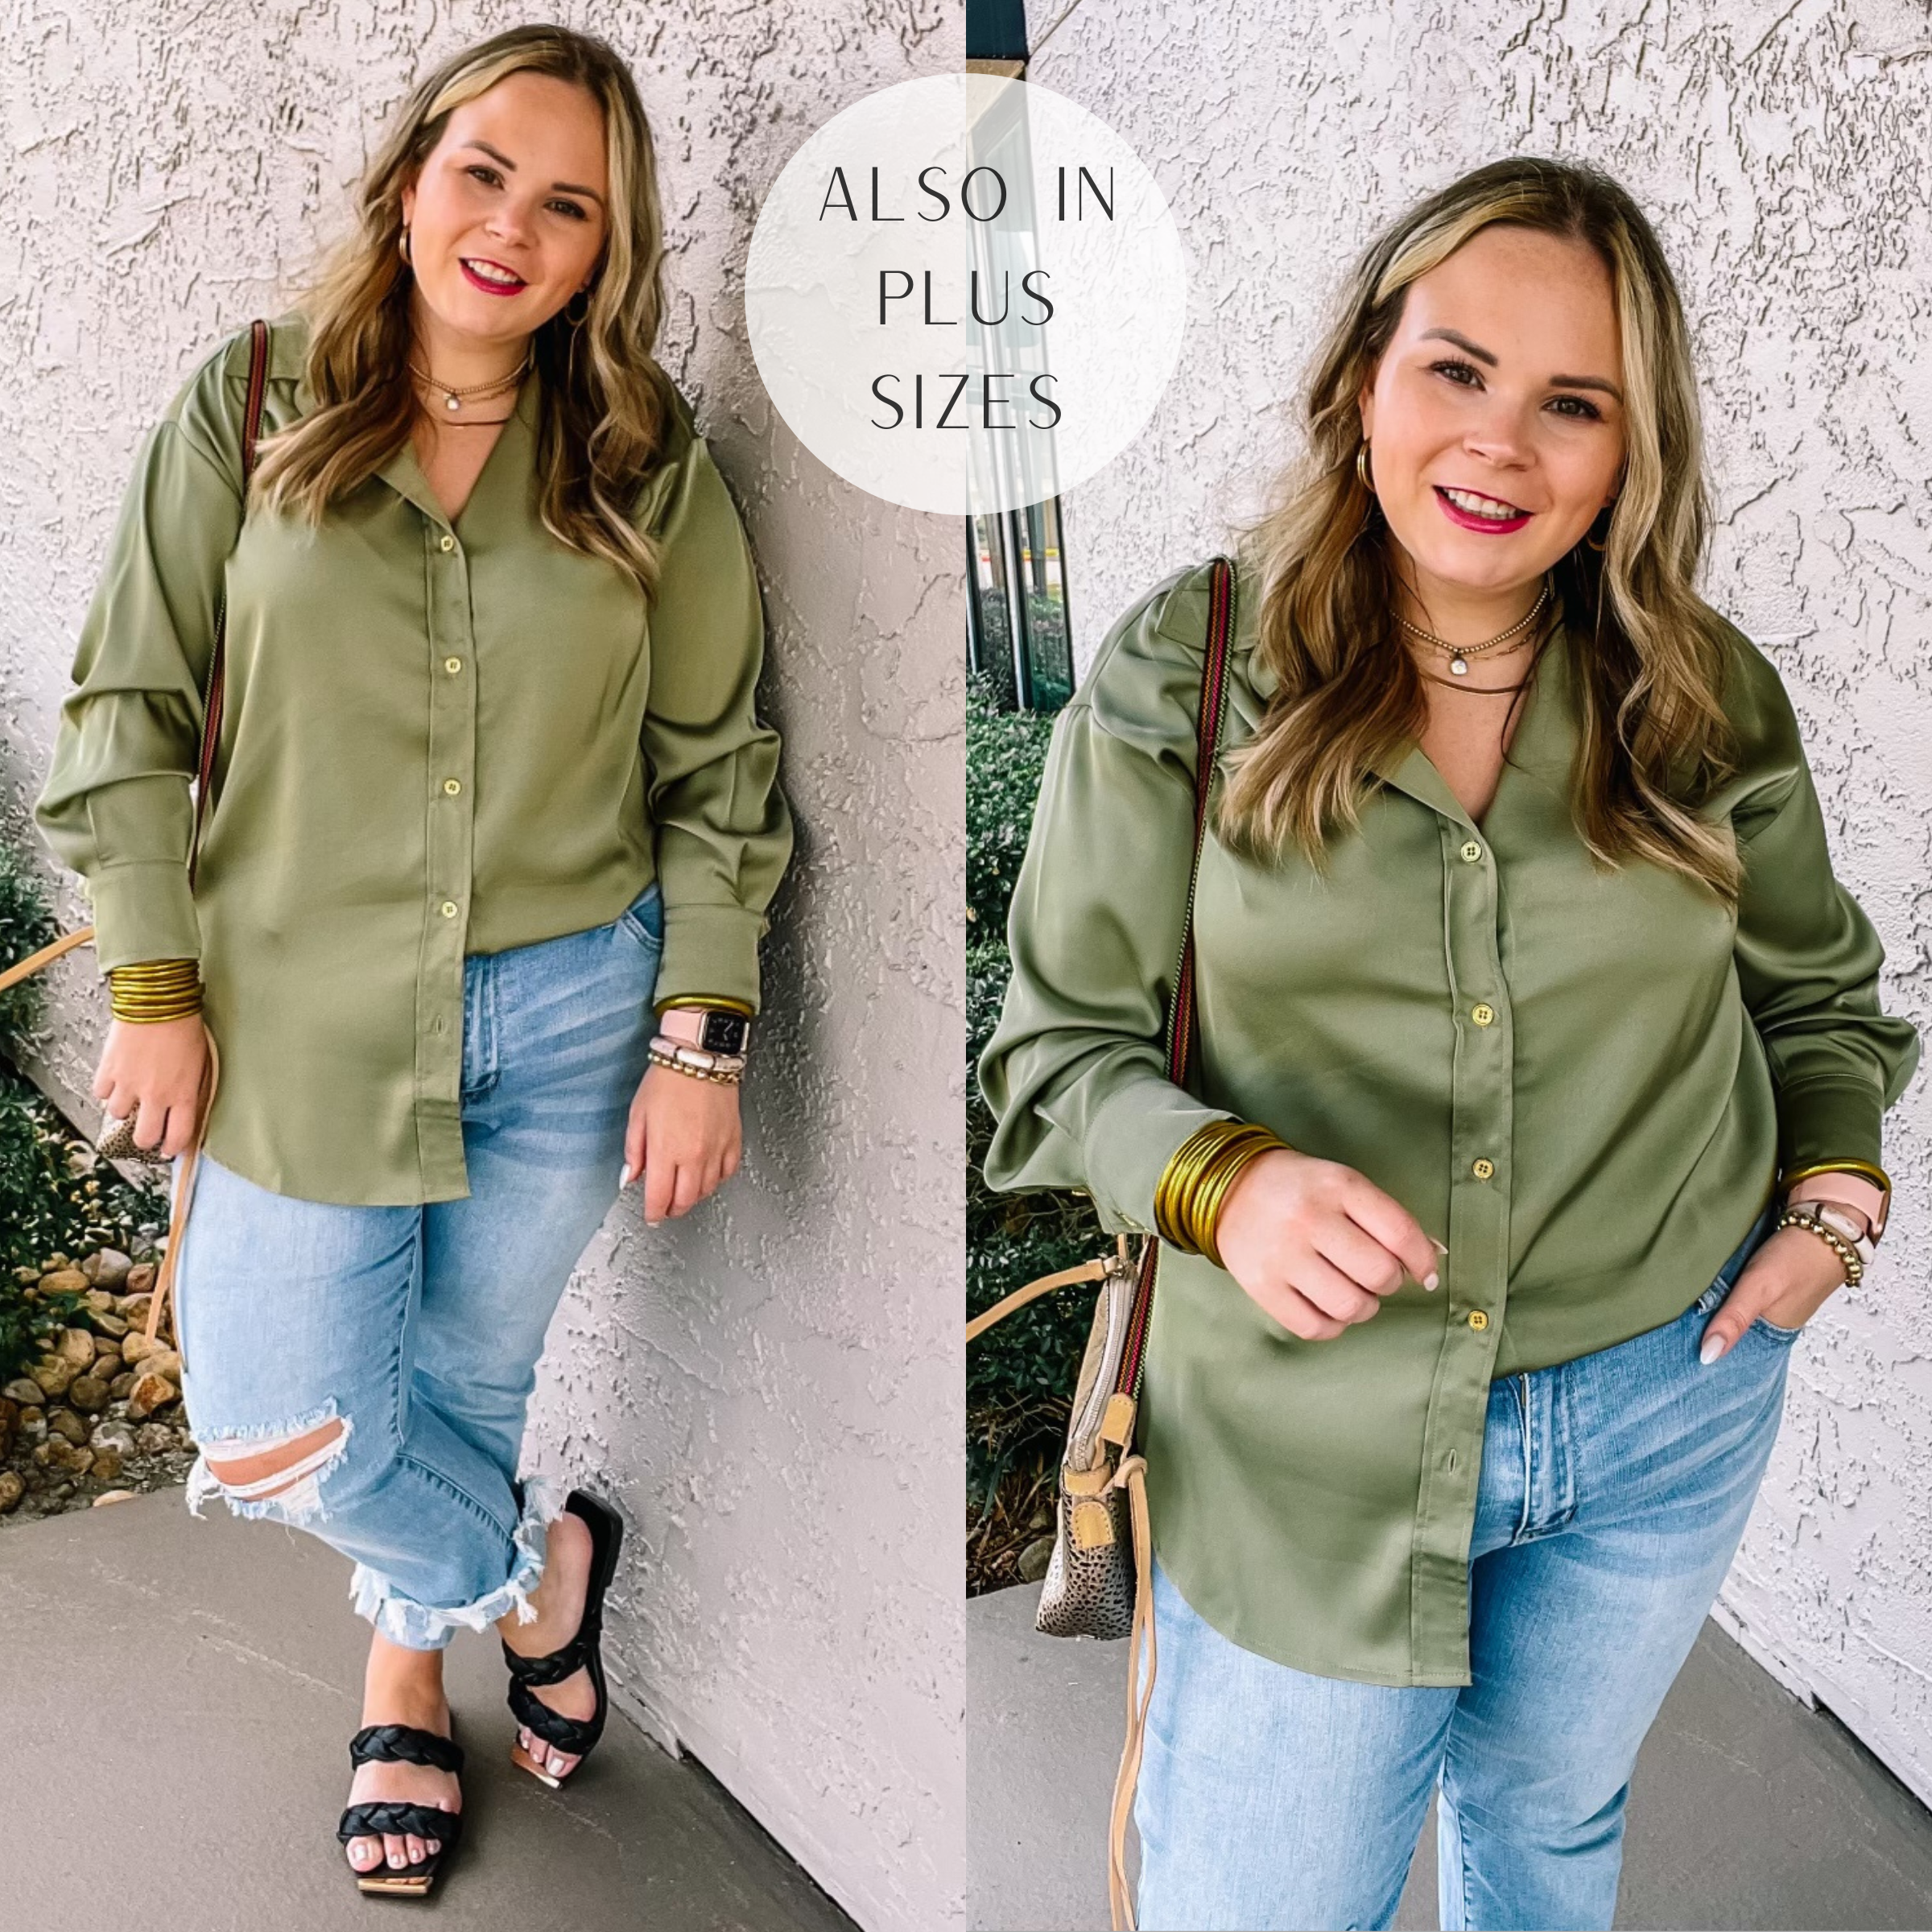 Model is wearing an olive green button up top with long sleeves and a collared neckline. Model has it paired with distressed boyfriend jeans, black sandals, and gold jewelry.